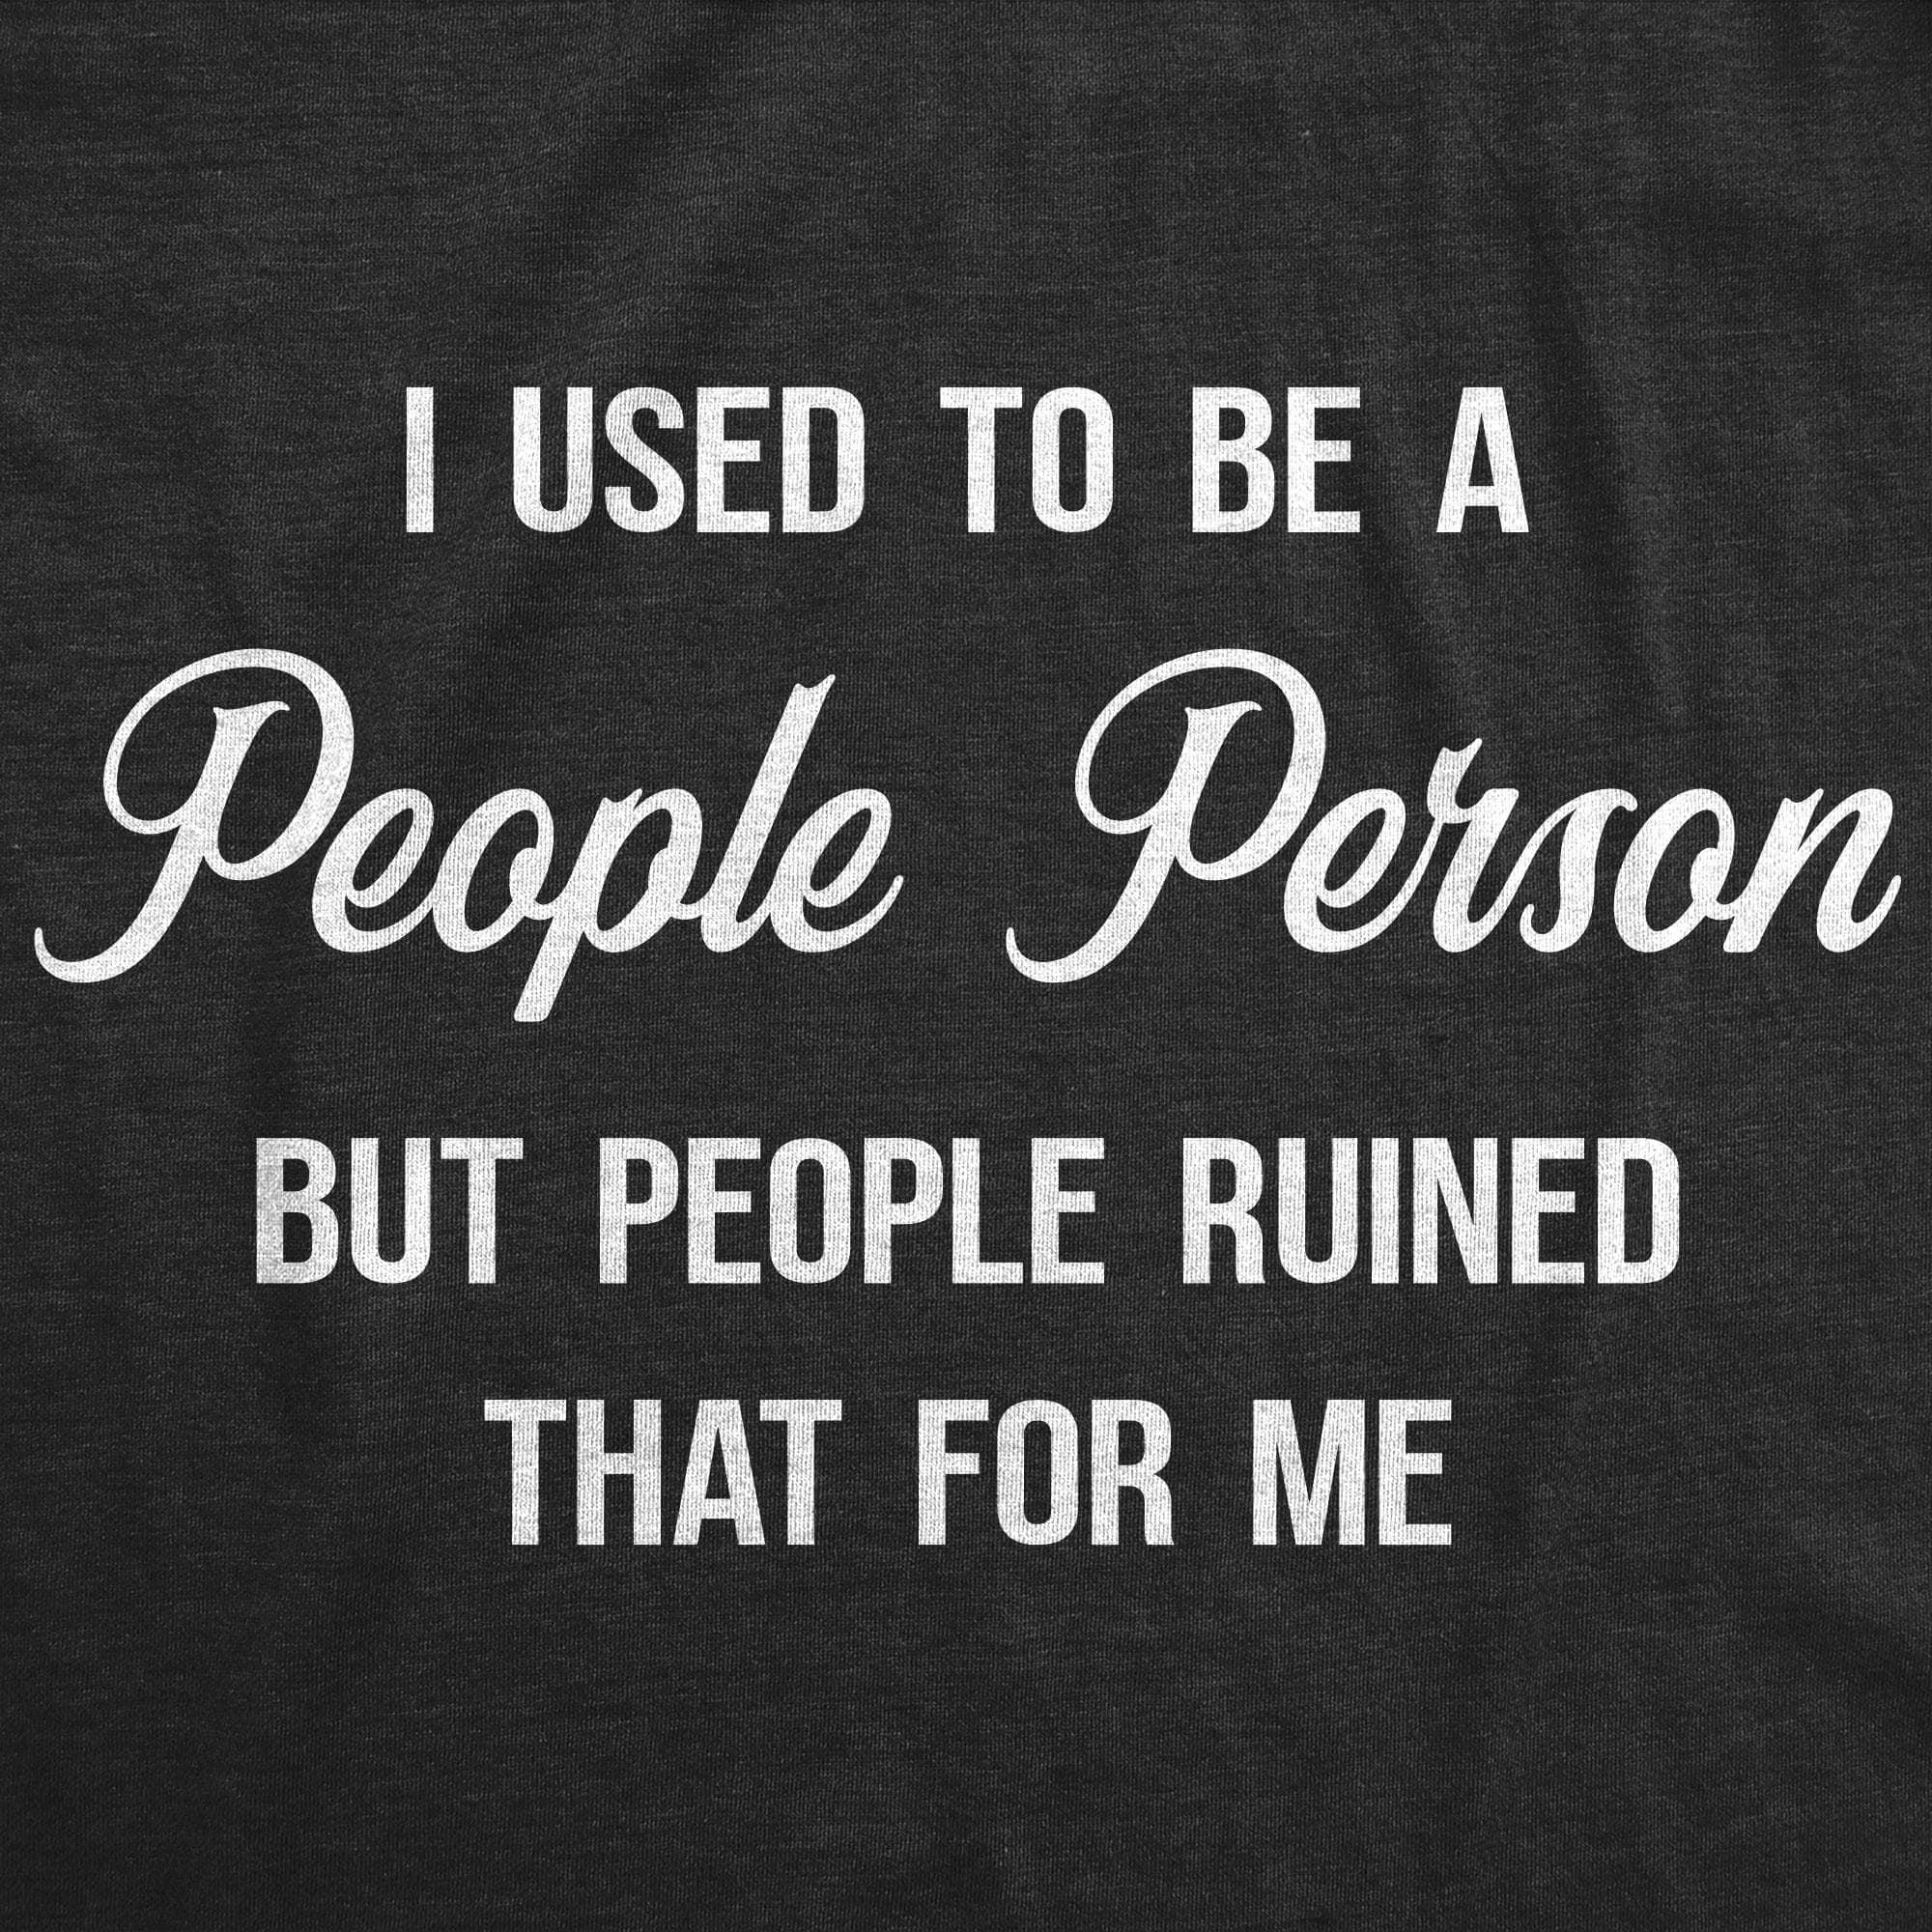 I Used To Be A People Person Men's Tshirt - Crazy Dog T-Shirts